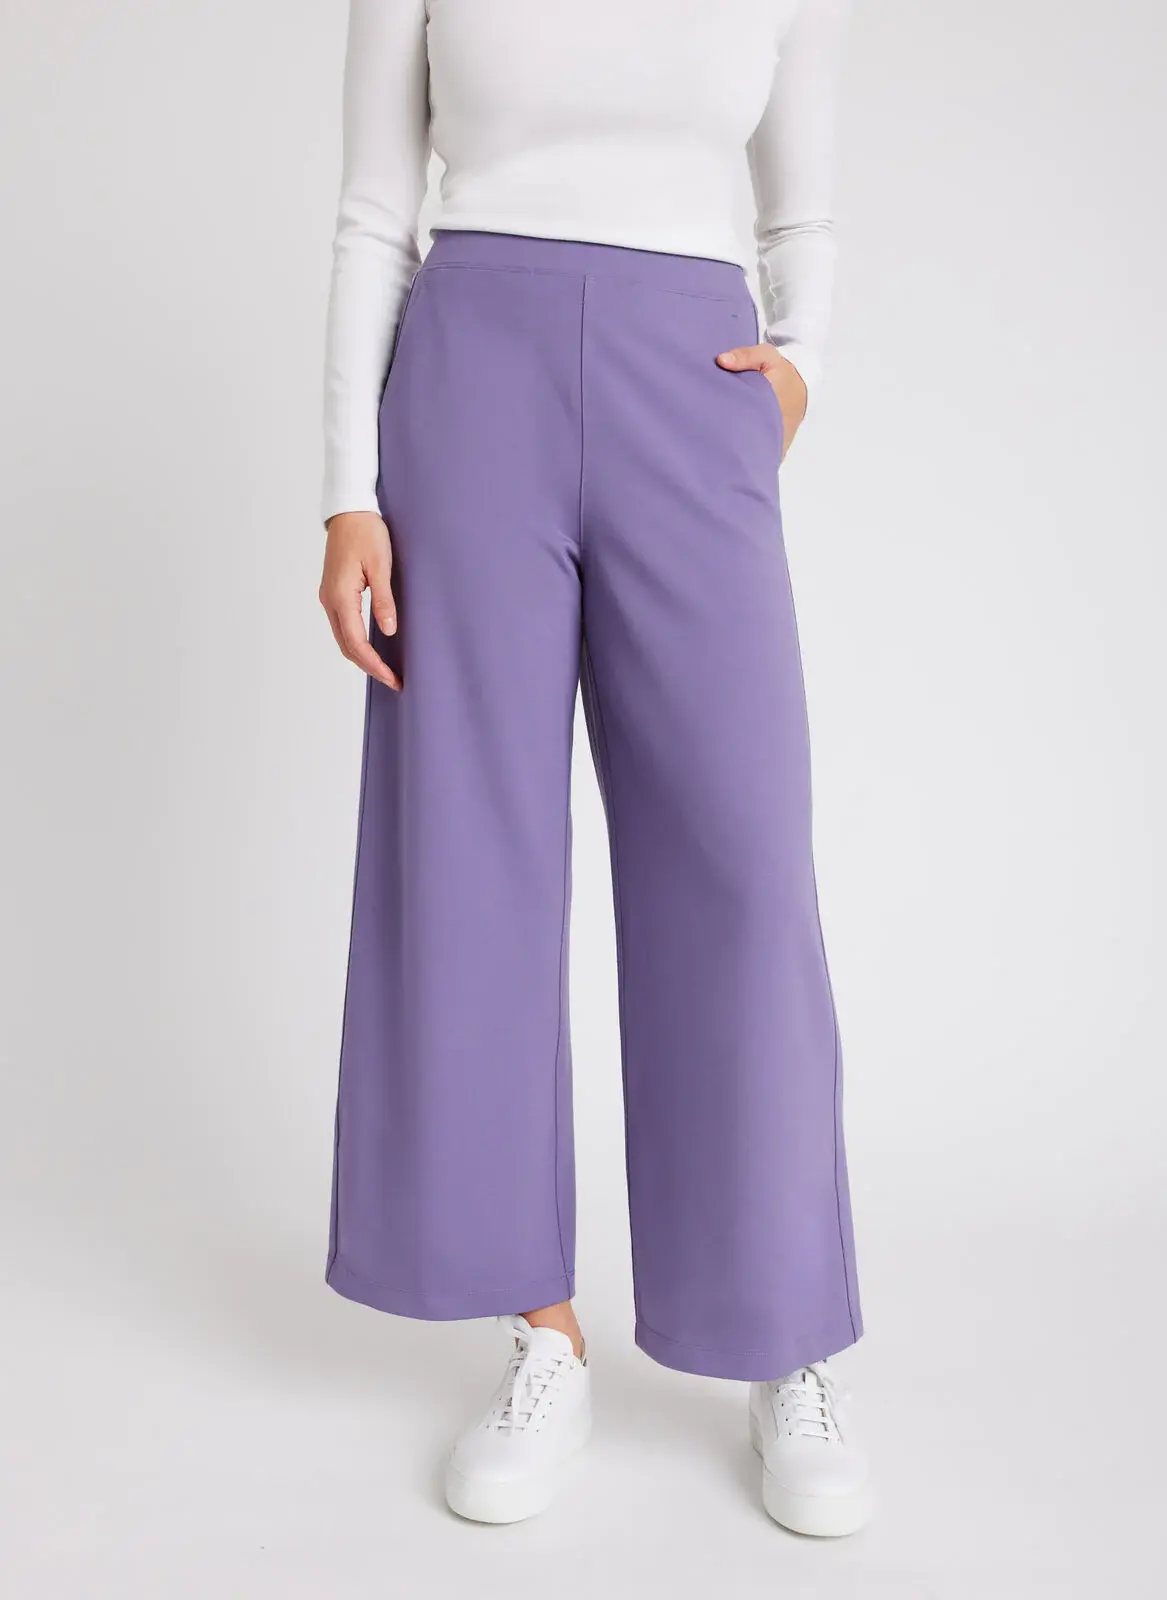 Kit And Ace Serenity Double Knit Wide Leg Pants. 1